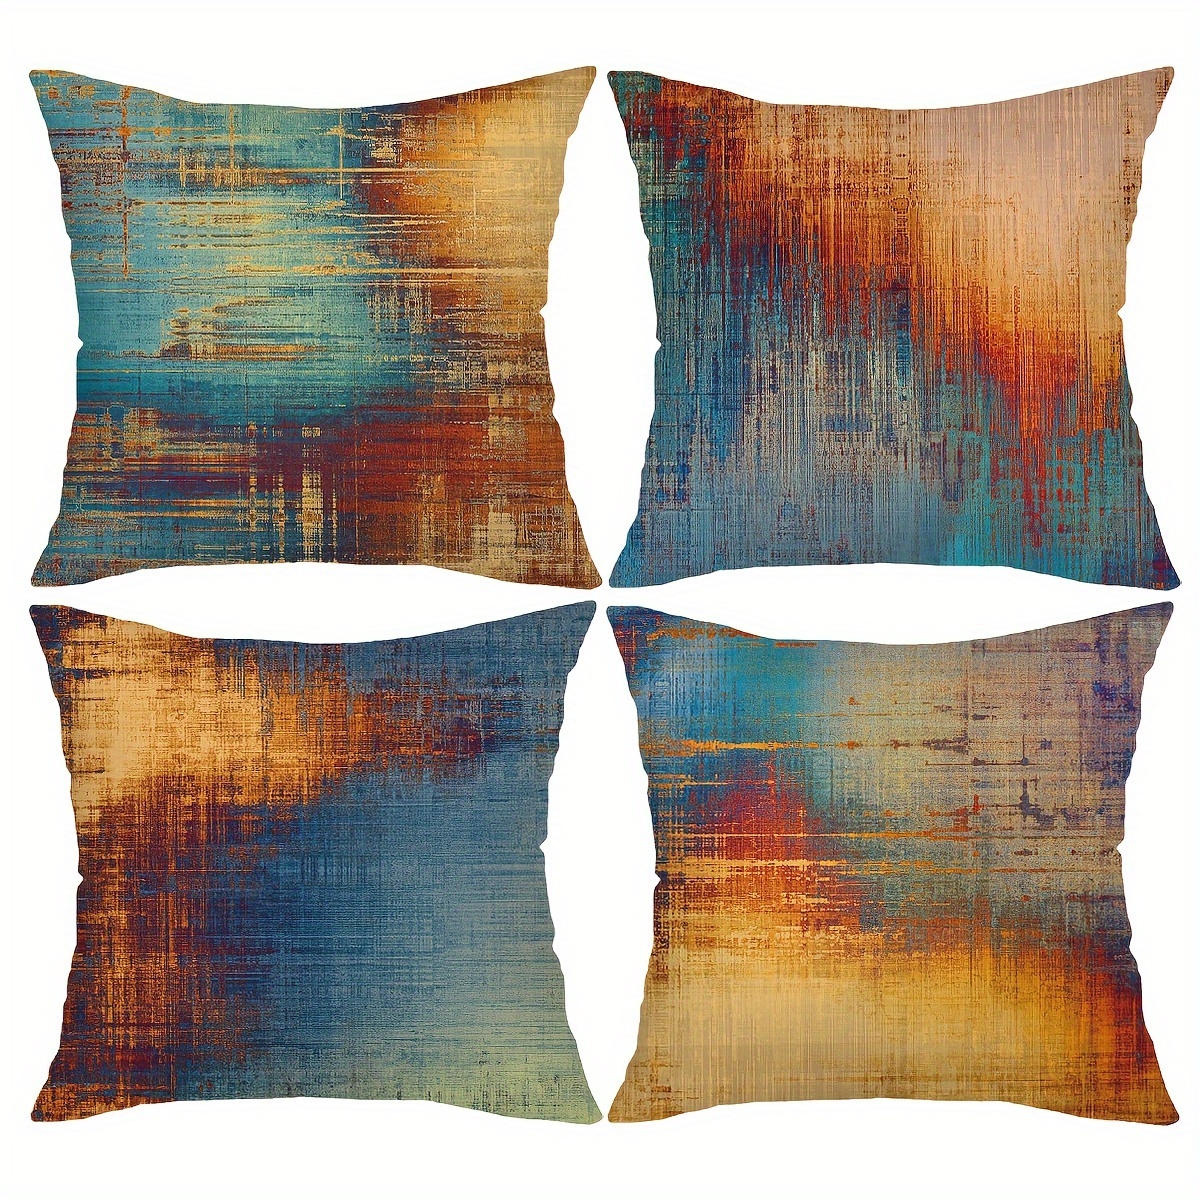 

4pcs Double-sided Print Vintage Abstract Throw Pillow Covers, Messy Rust Painting Decorative Pillow Cases Home Decor For Couch Sofa Living Room Bedroom, Set Of 4, Without Pillow Inserts